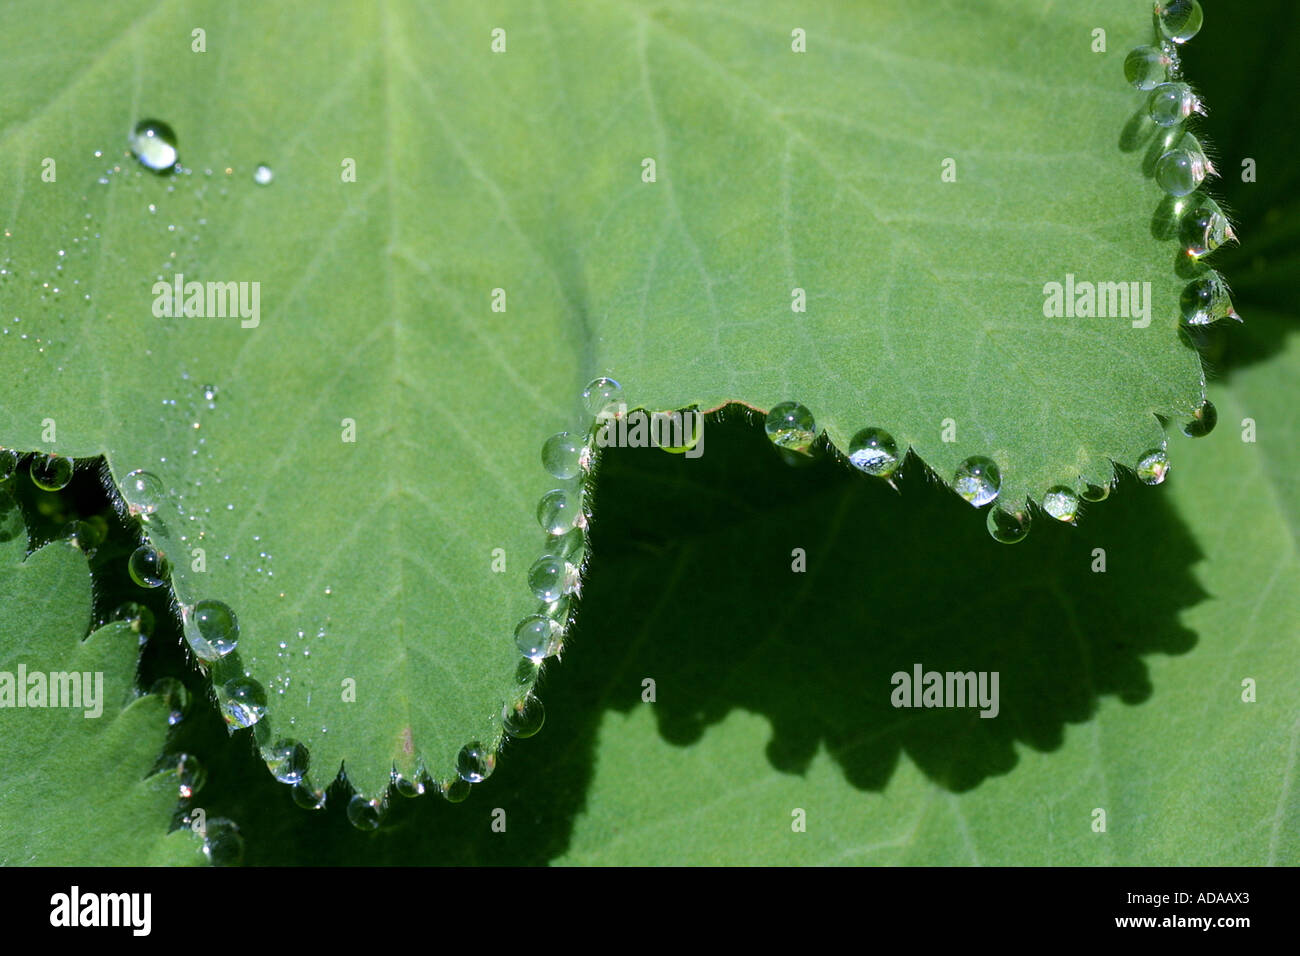 common lady's-mantle (Alchemilla vulgaris), removal of water drops Stock Photo